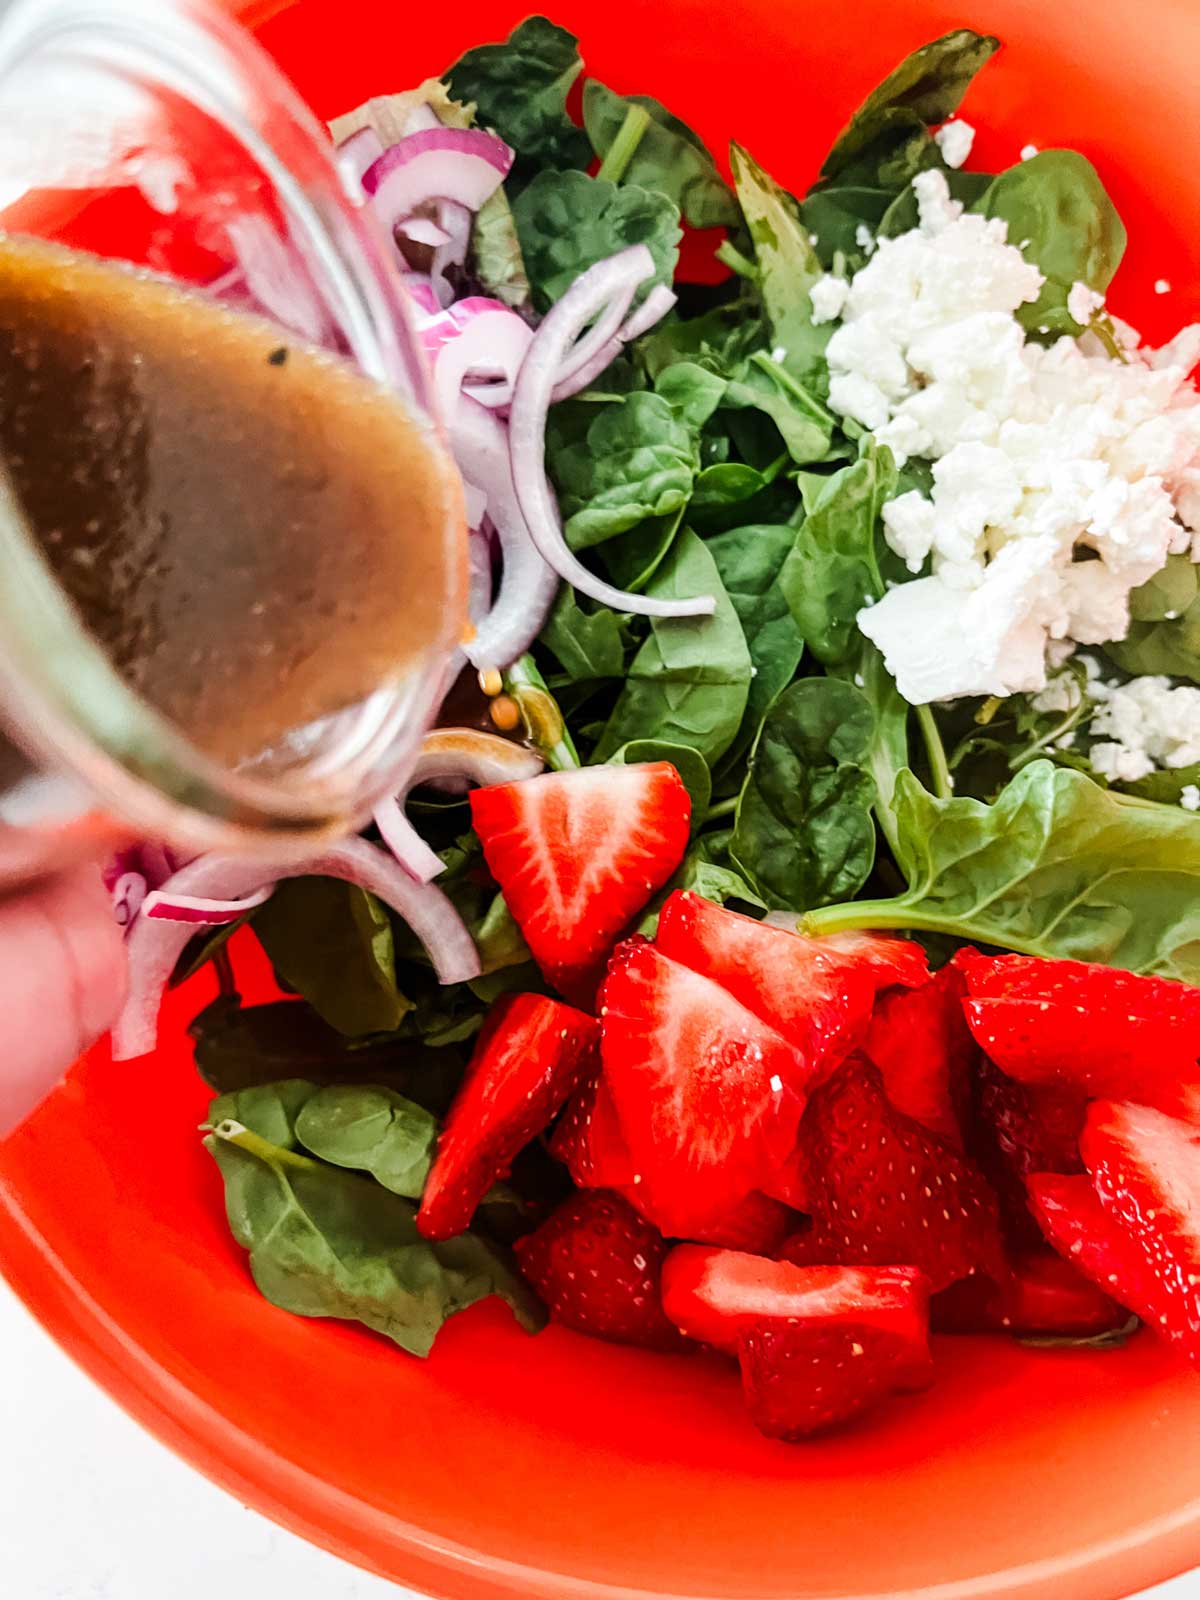 Photo of balsamic vinegar dressing being poured onto a strawberry goat cheese salad.